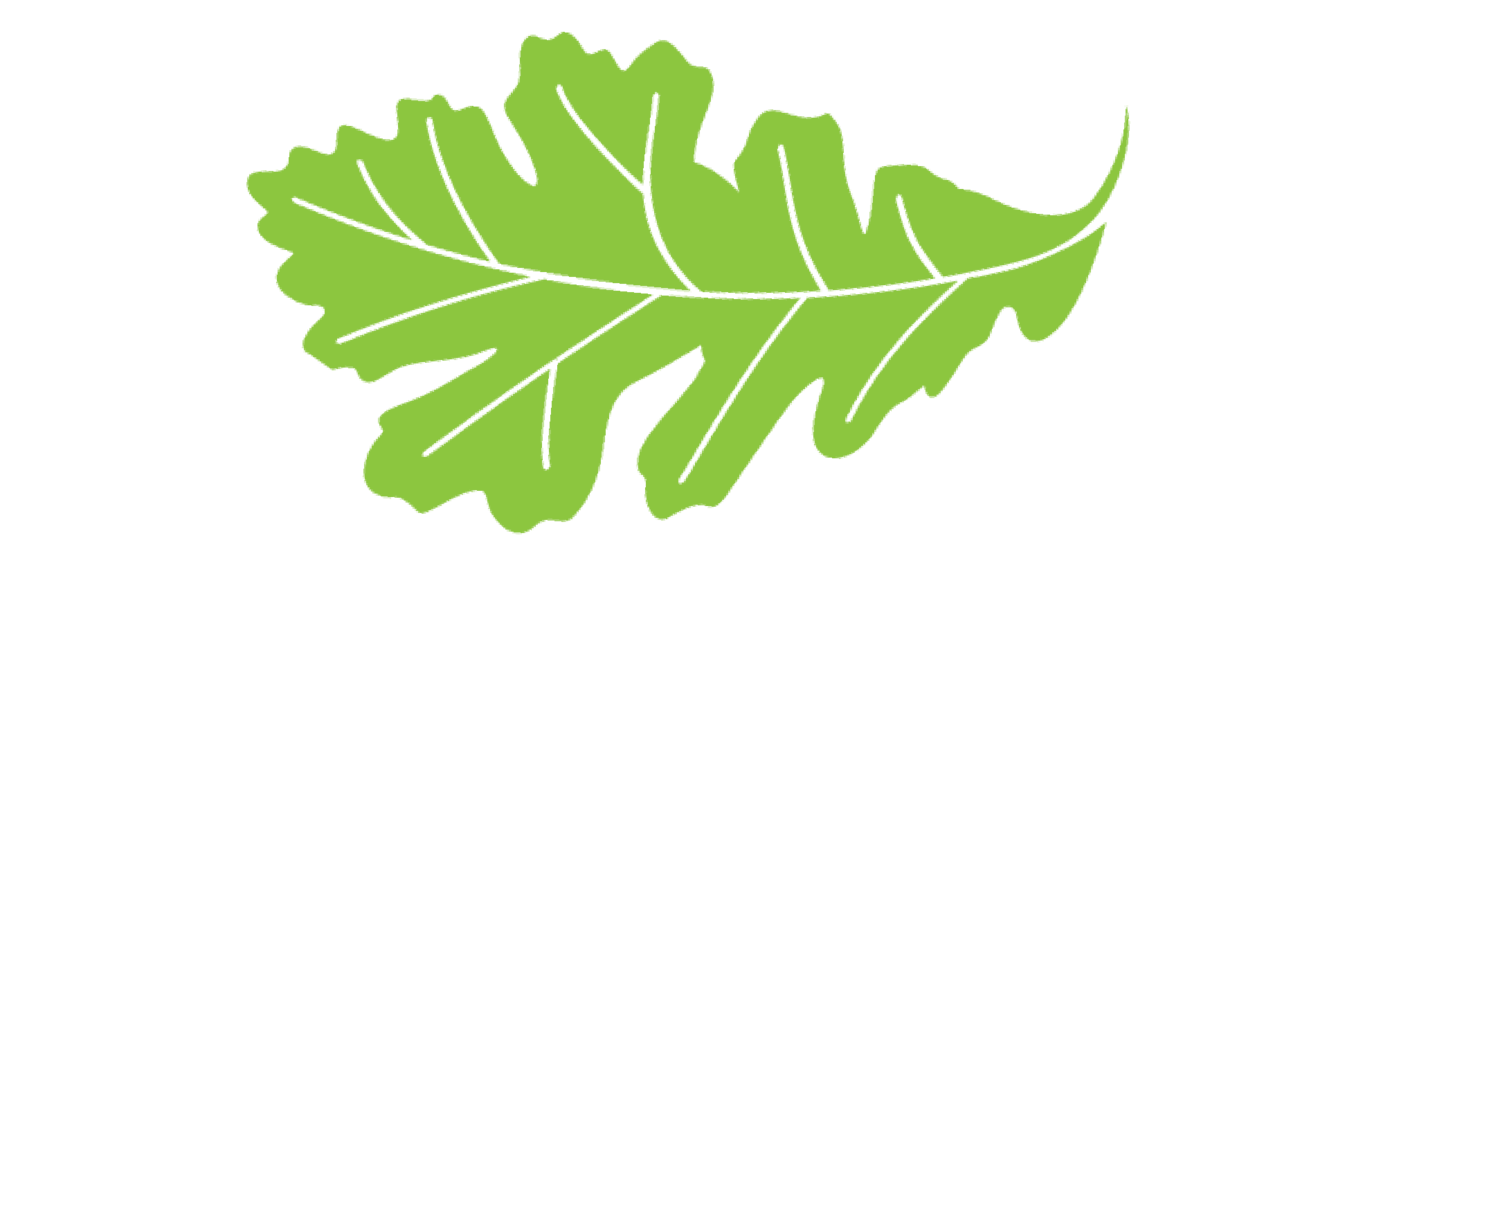 Applied Ecological Institute